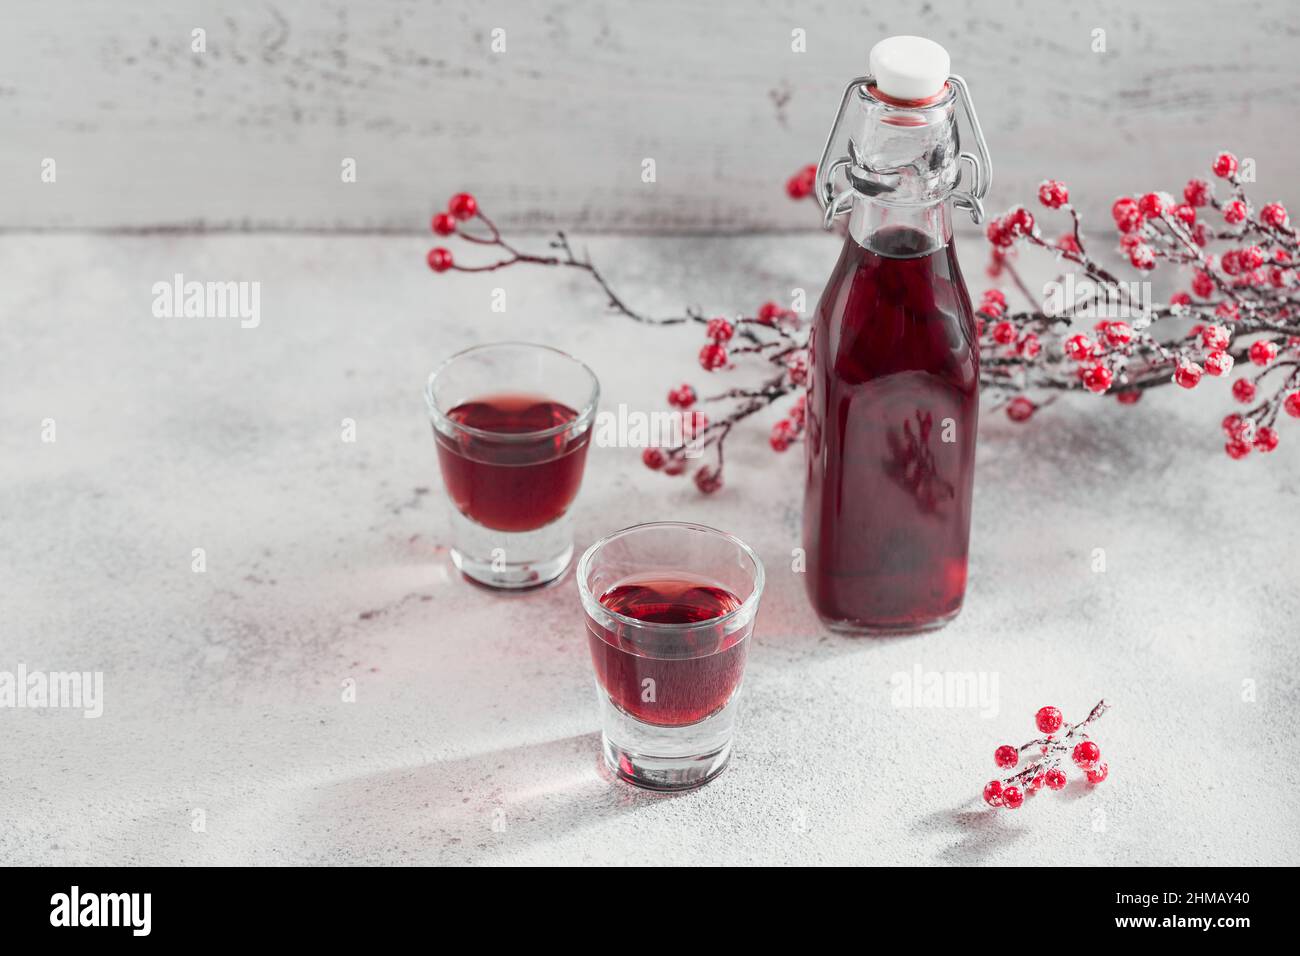 Homemade infused vodka, tincture or liqueur of red cherry on white background. Berry alcoholic drinks concept. Stock Photo